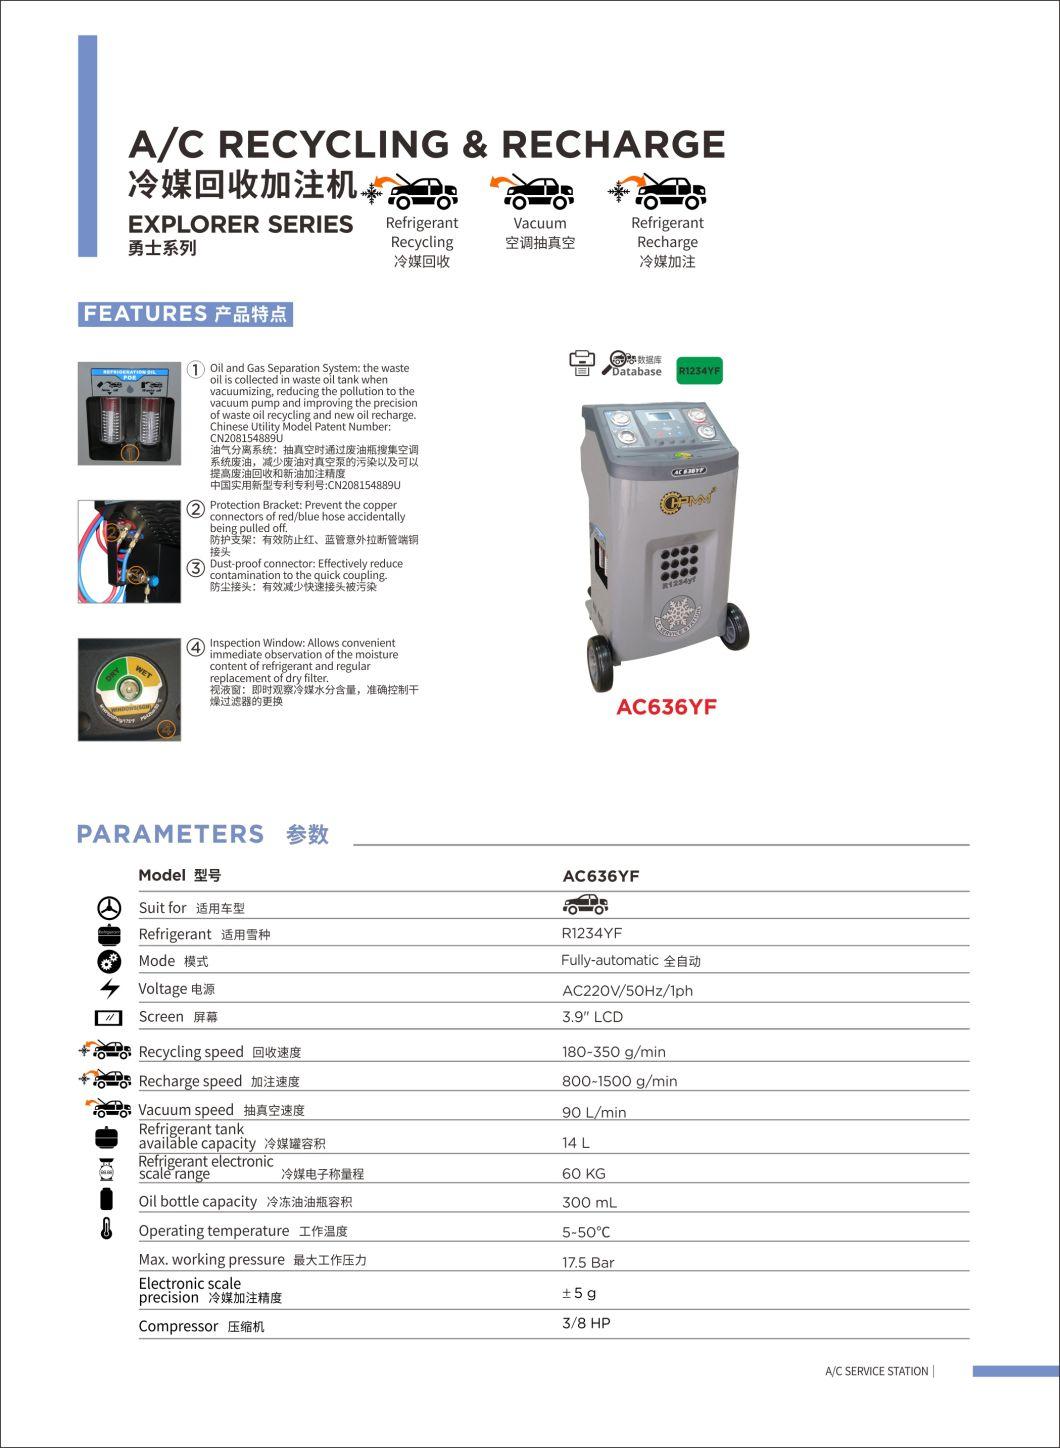 A/C Recovery Machine AC636yf A/C Recycling & Recharger R-1234yf Refrigerant Recovery, Recycling and Recharging Machine